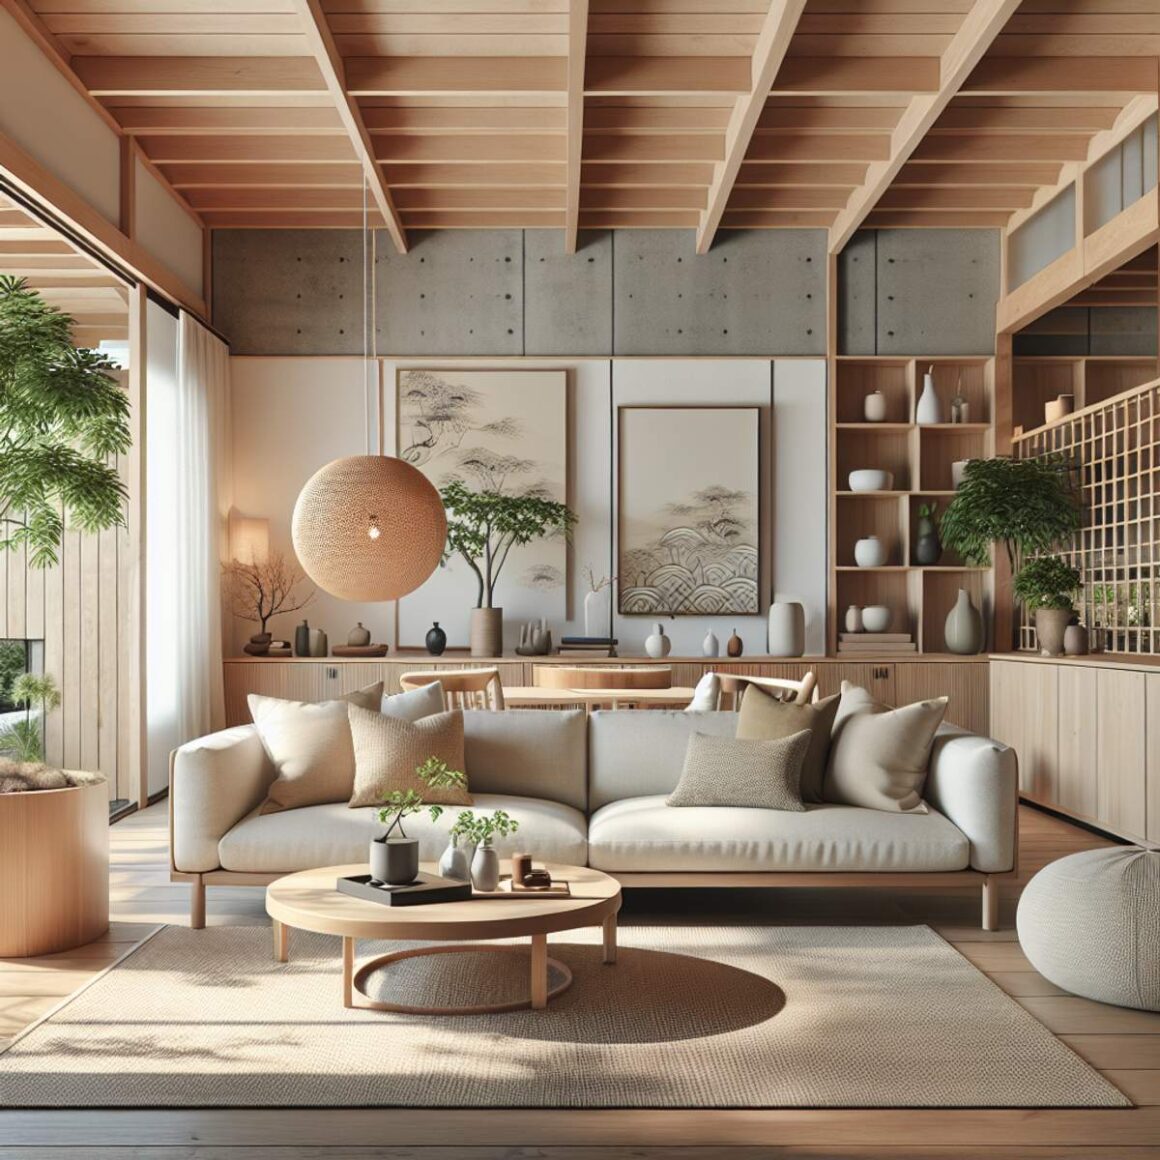 An open-space living room with low-set sofas, unadorned wooden tables, simple rugs, neutral color cushions, ambient lighting, soft textures, and indoor plants.